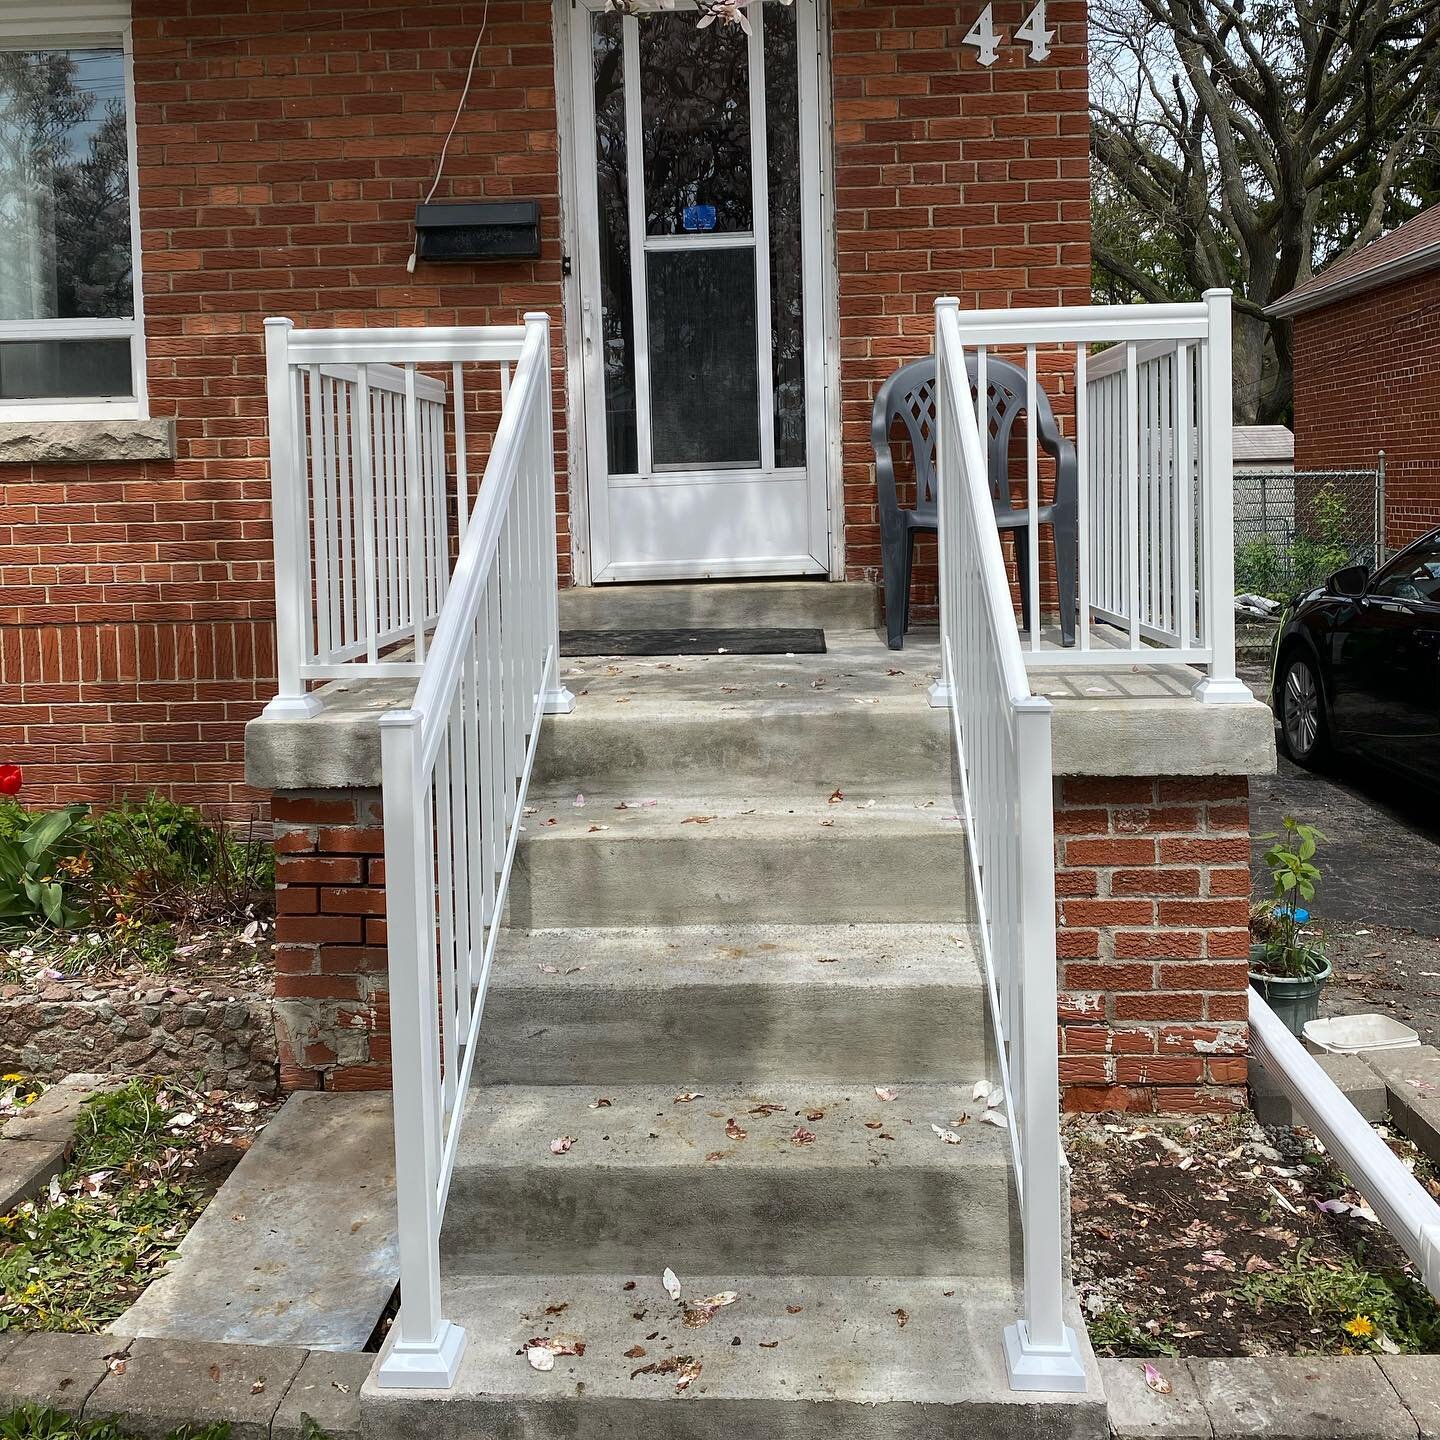 A Refinish on this Porch in Scarborough and a New Railing to Top it Off ! 
➡️➡️➡️
&bull;
&bull;
&bull;
&bull;
&bull;

#railing #aluminumrailing #gta #yorkregion #contractor #building #backyarddesign #glassrailing #renovation #landscaping #diy